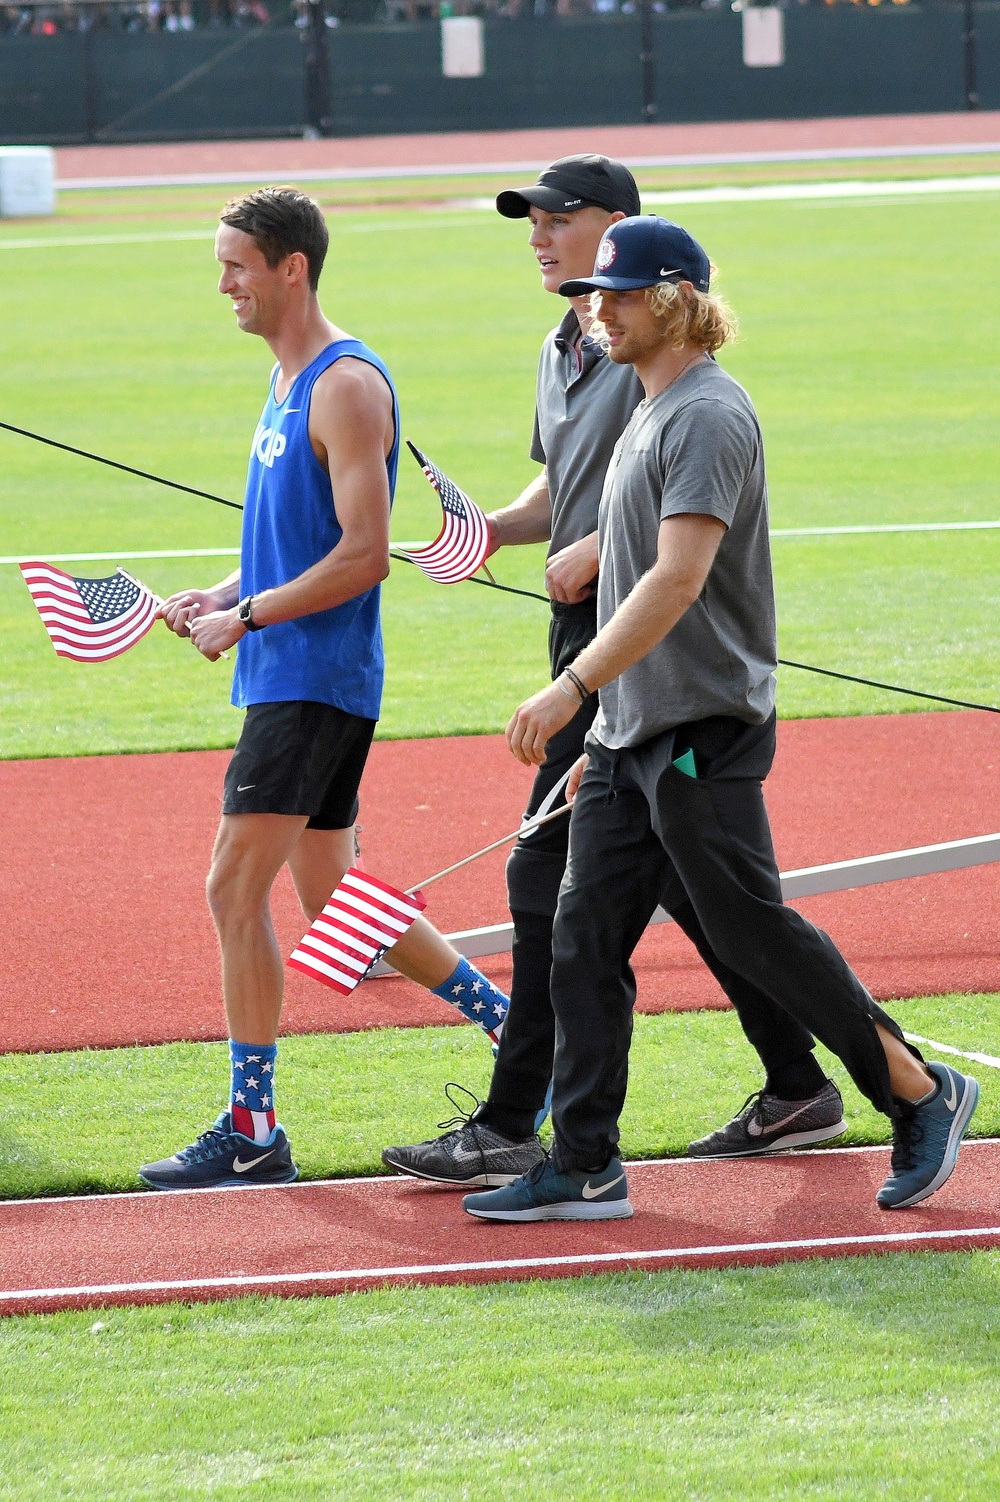 DVIDS Images U.S. Olympic Team Track and Field Trials [Image 20 of 27]